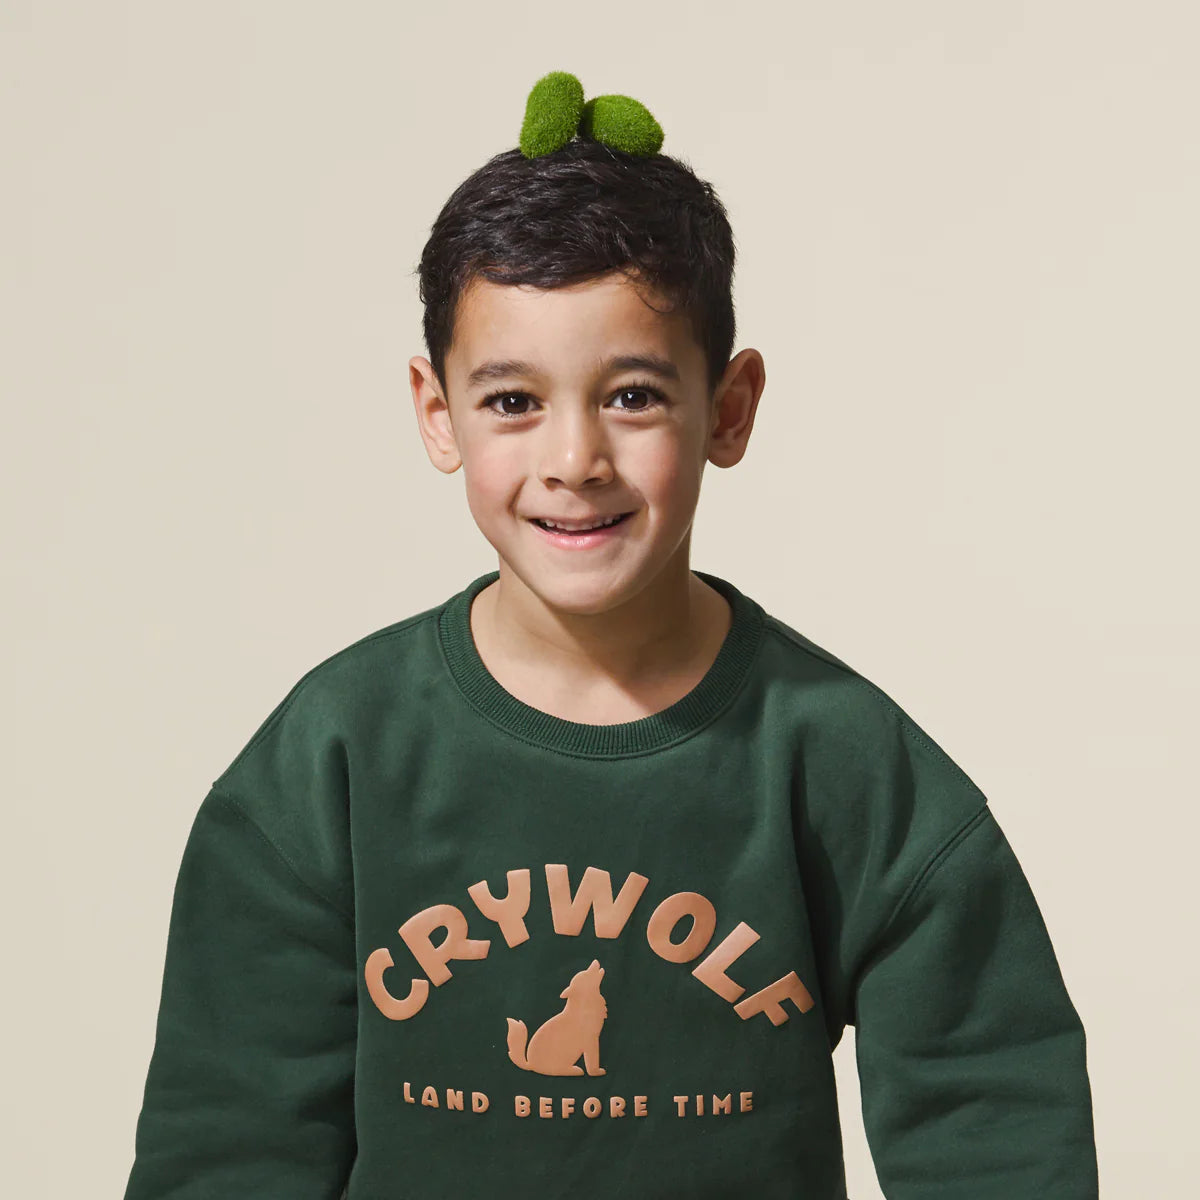 Crywolf Chill Sweater